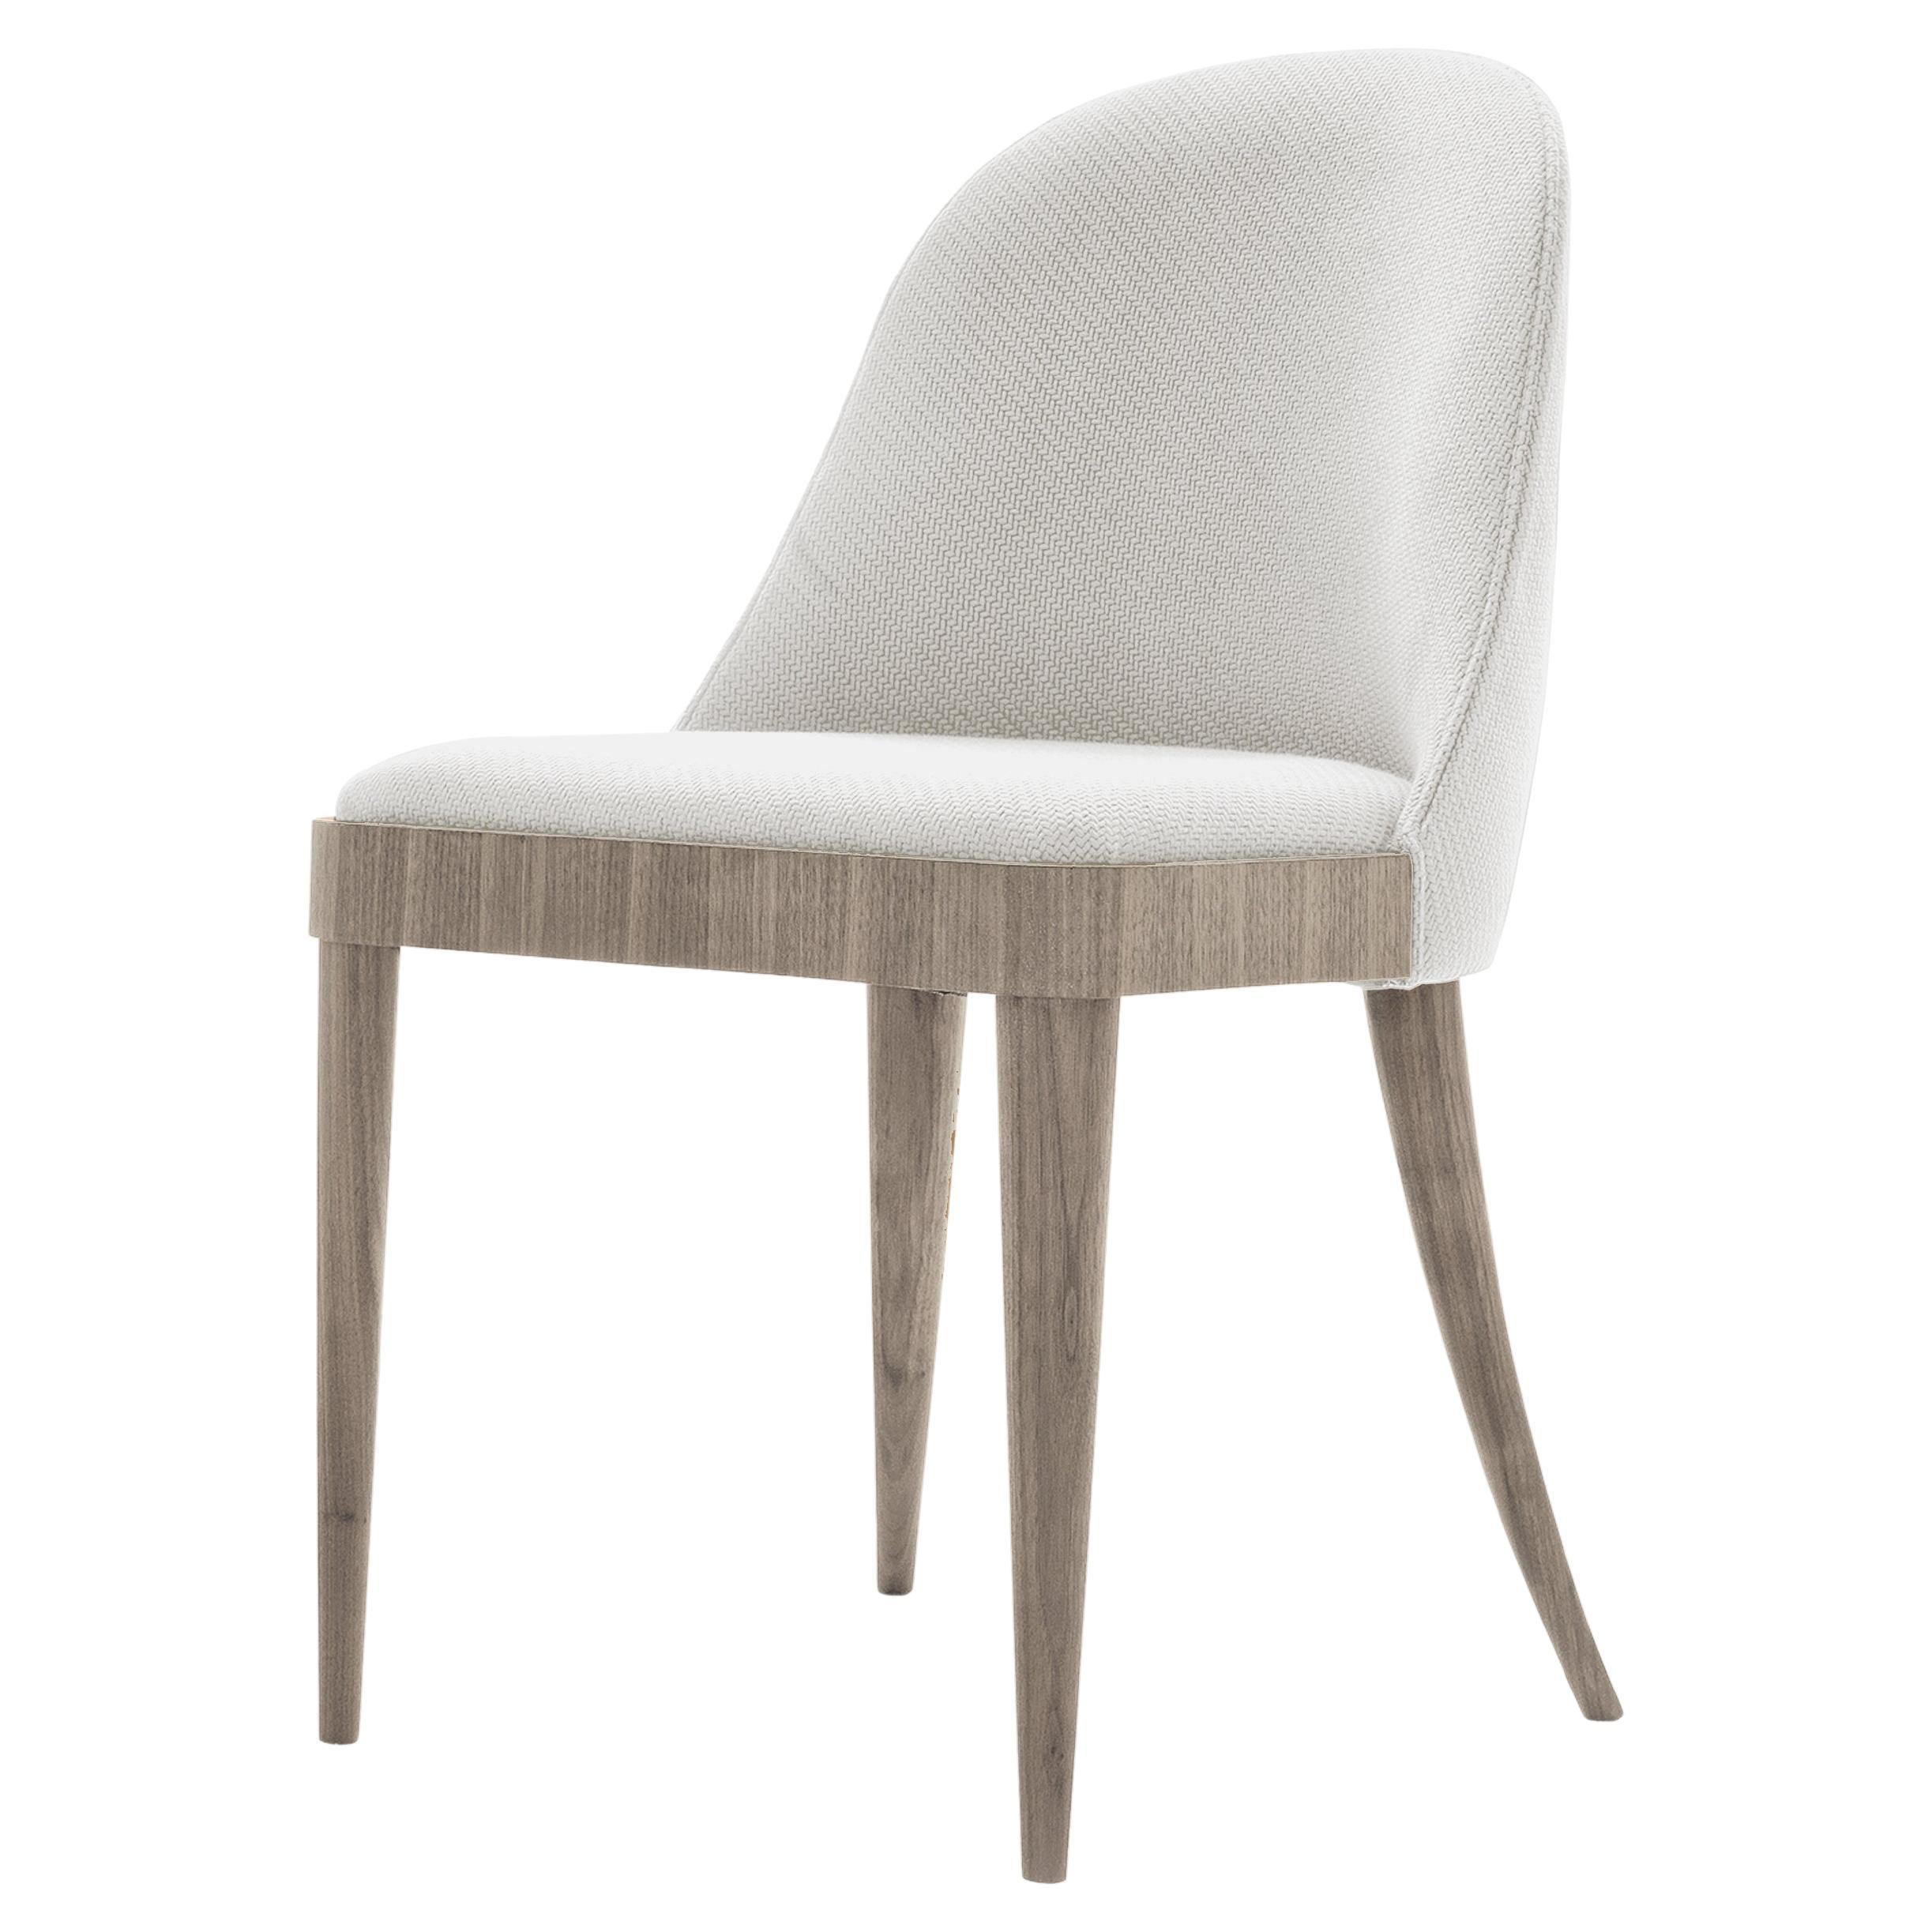 Cordiale Solid Wood Chair, Walnut in Hand-Made Natural Grey Finish, Contemporary